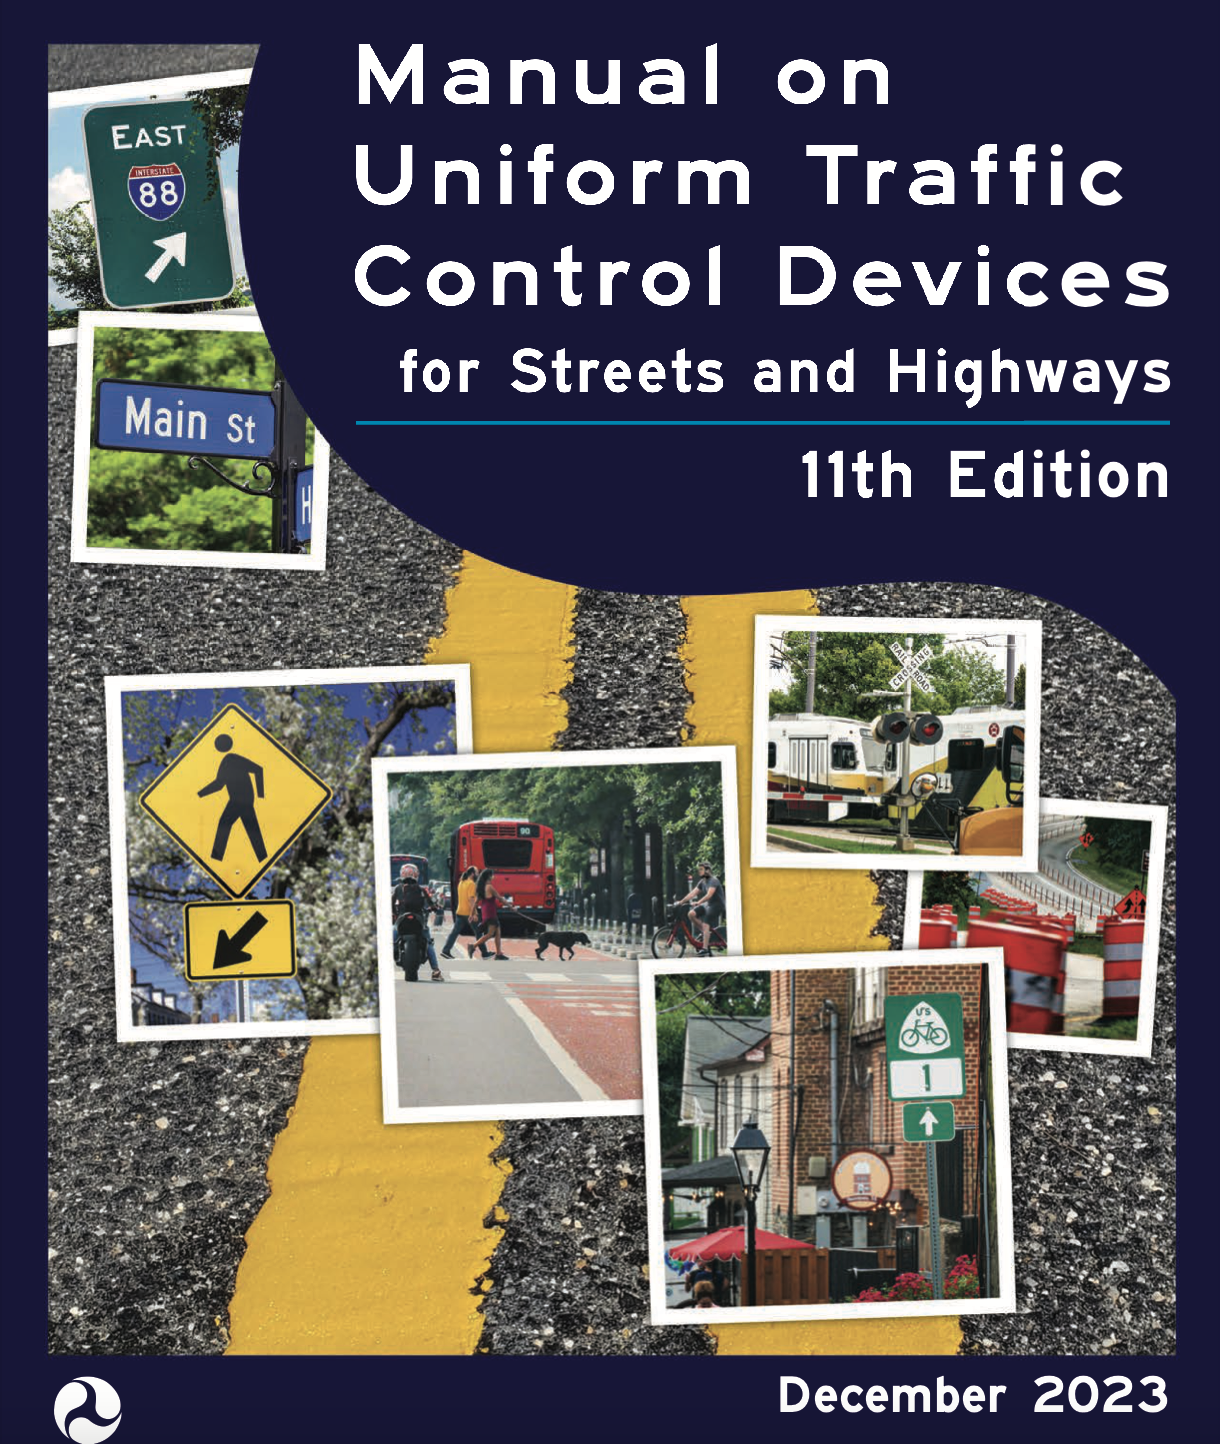 Explore the new Manual on Uniform Traffic Control Devices.